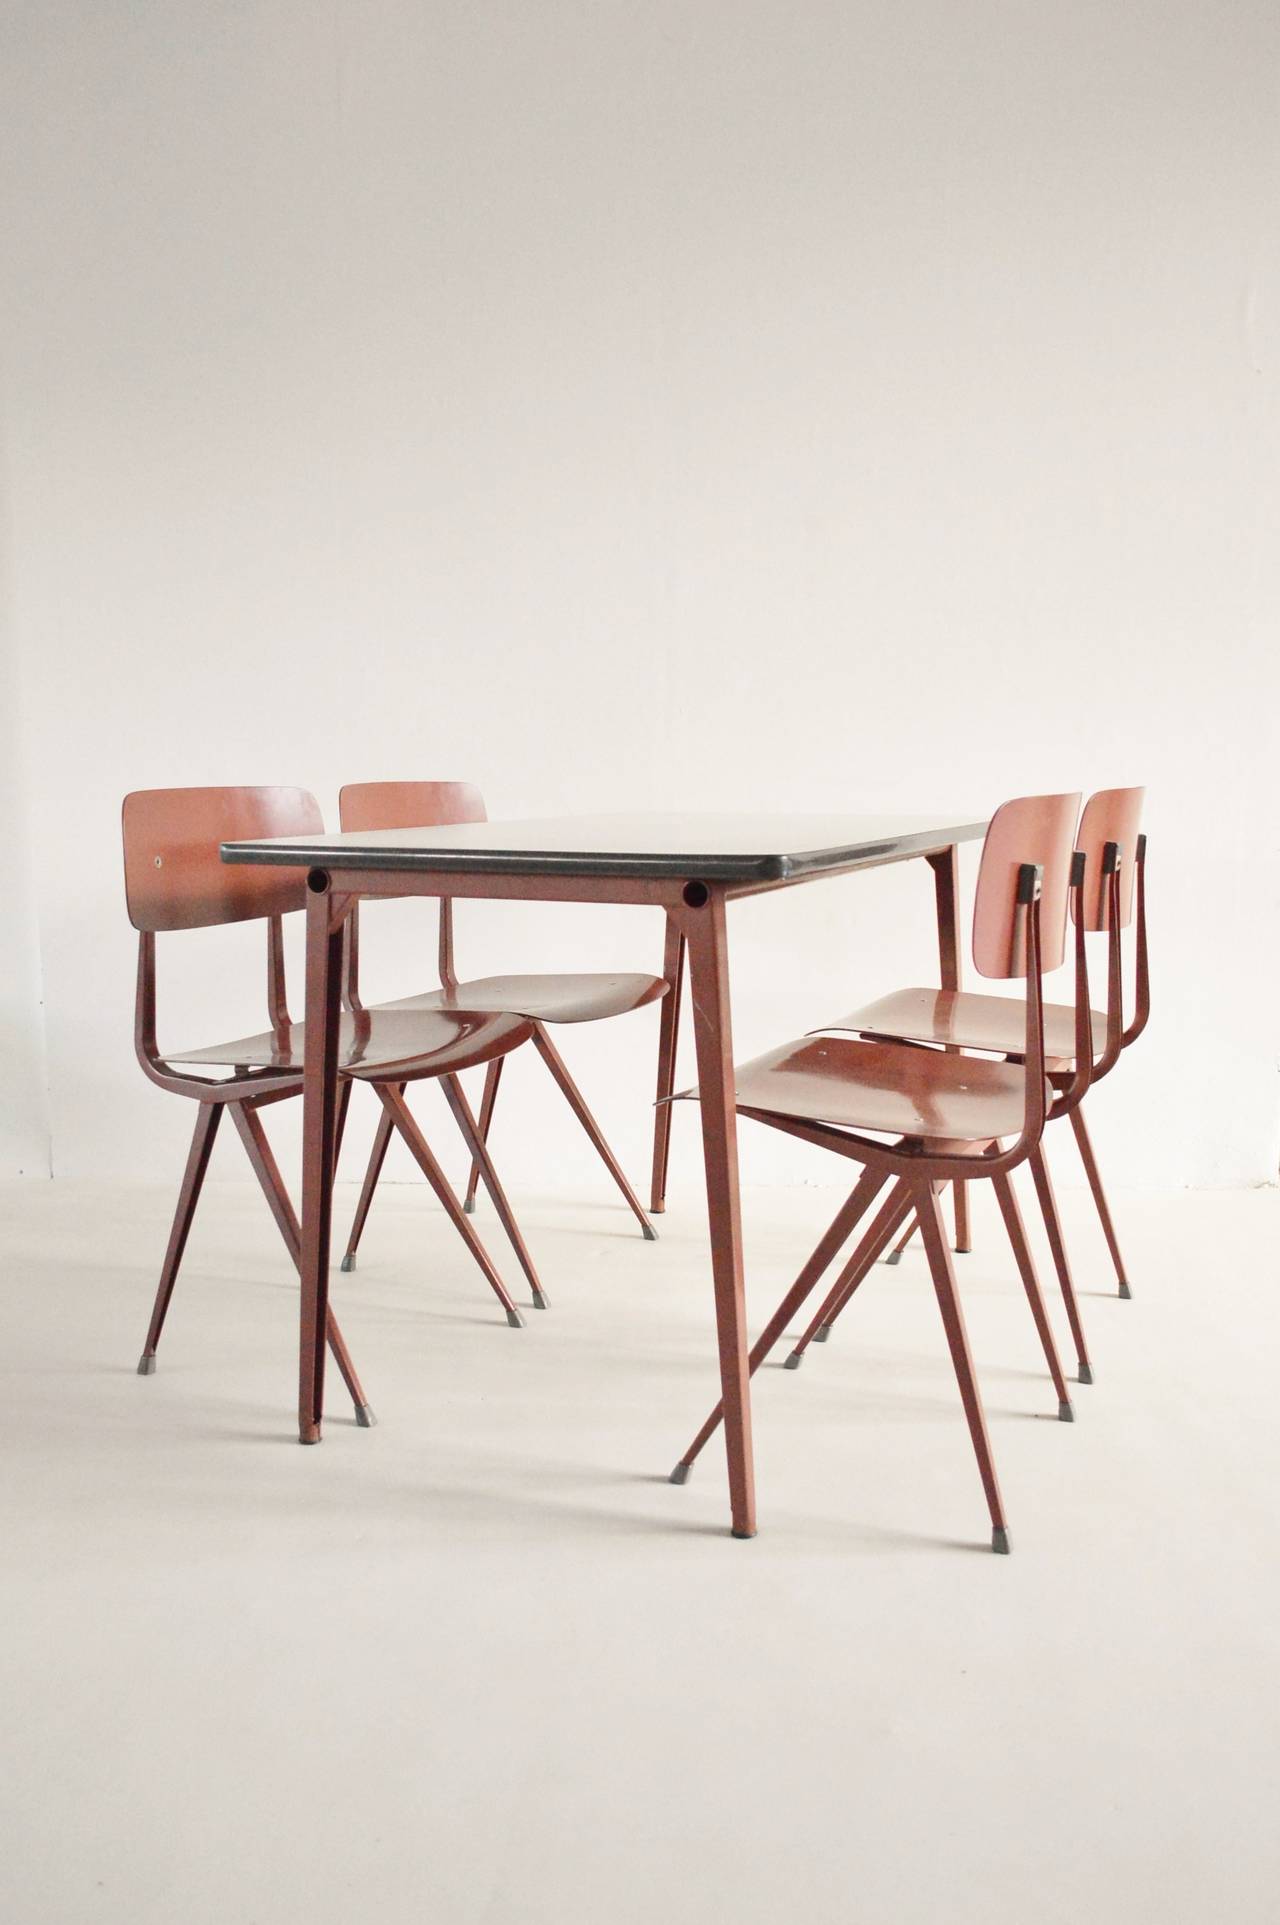 An exceptional one-off custom color dining set designed by Friso Kramer for Ahrend de Cirkel. Having consulted with respected experts in Kramer's work this set is believed to be completely unique with off red legs and fibre seats. It is believed to